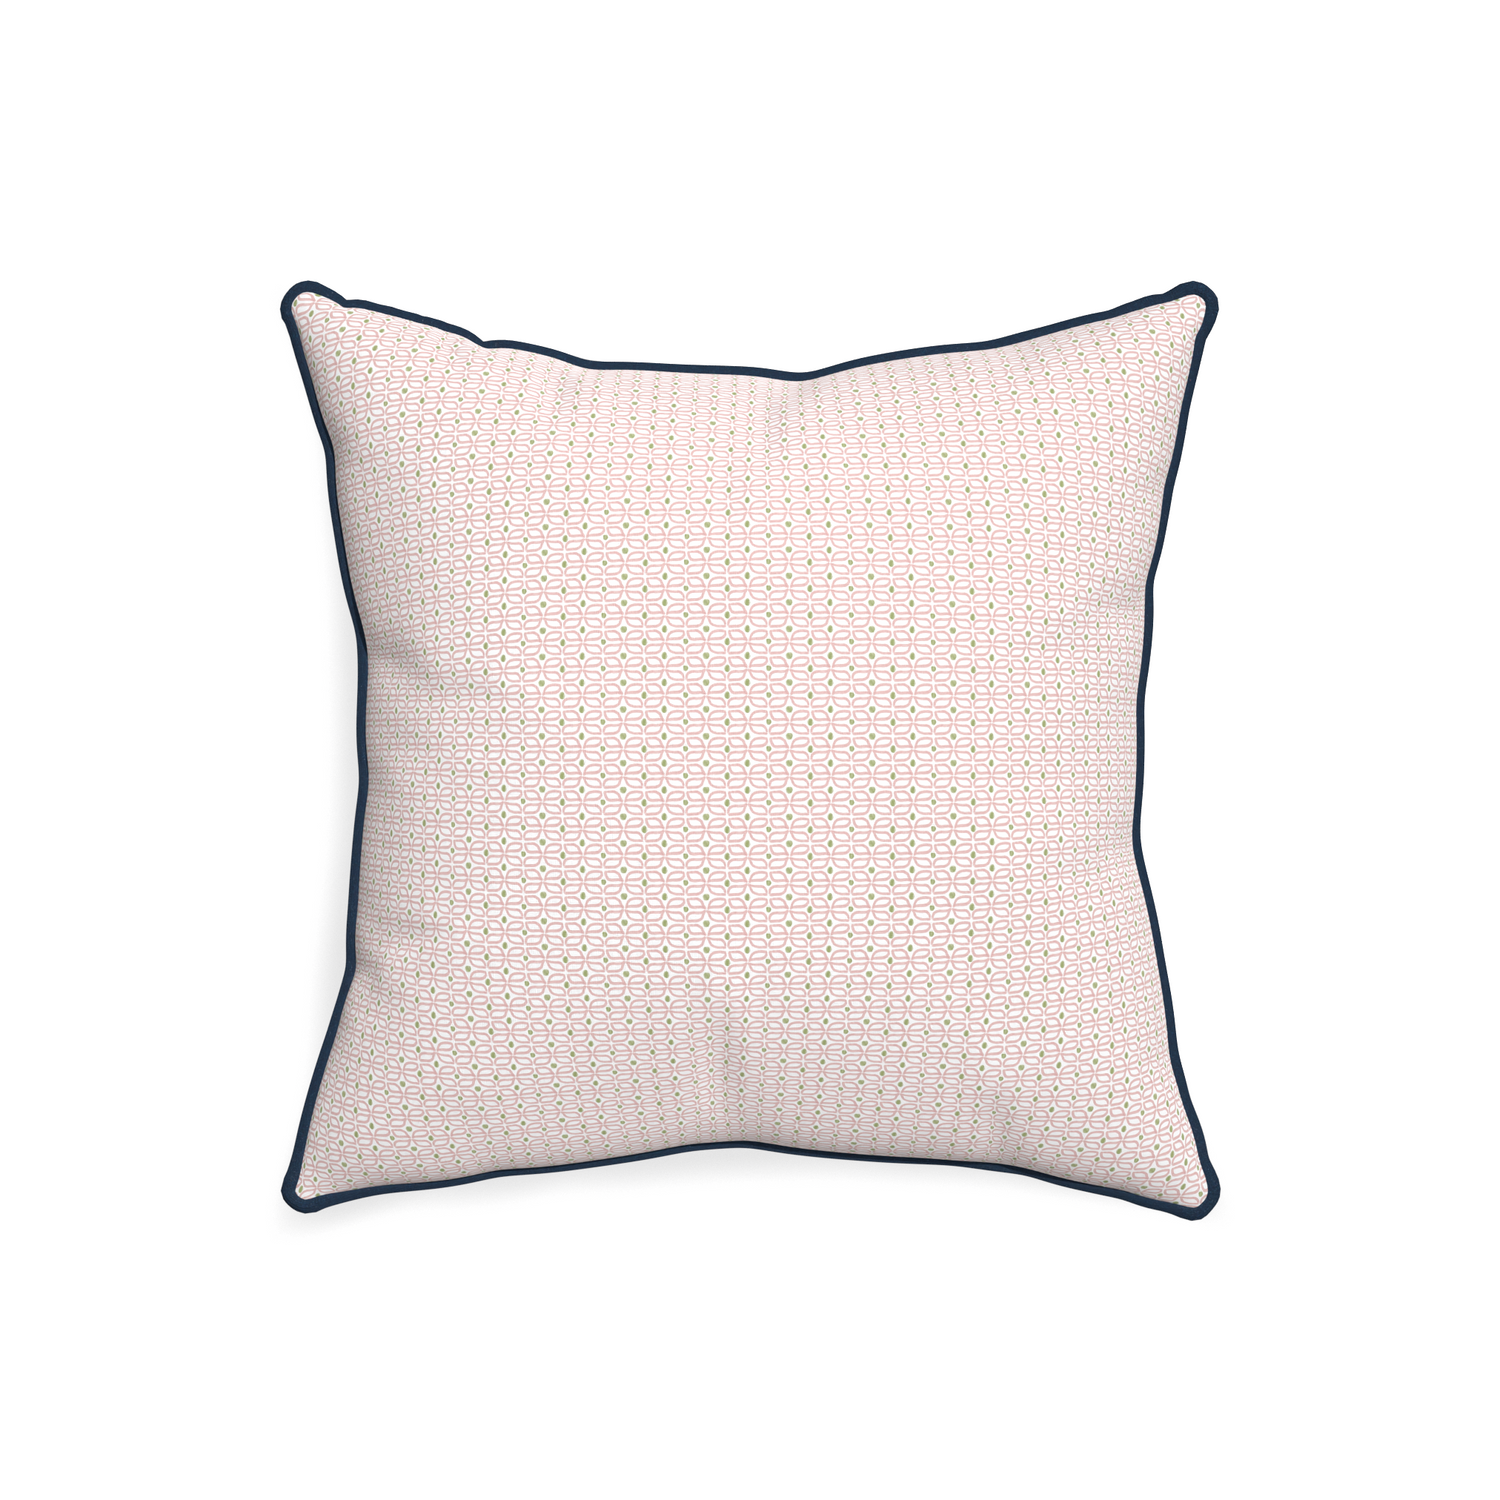 20-square loomi pink custom pink geometricpillow with c piping on white background